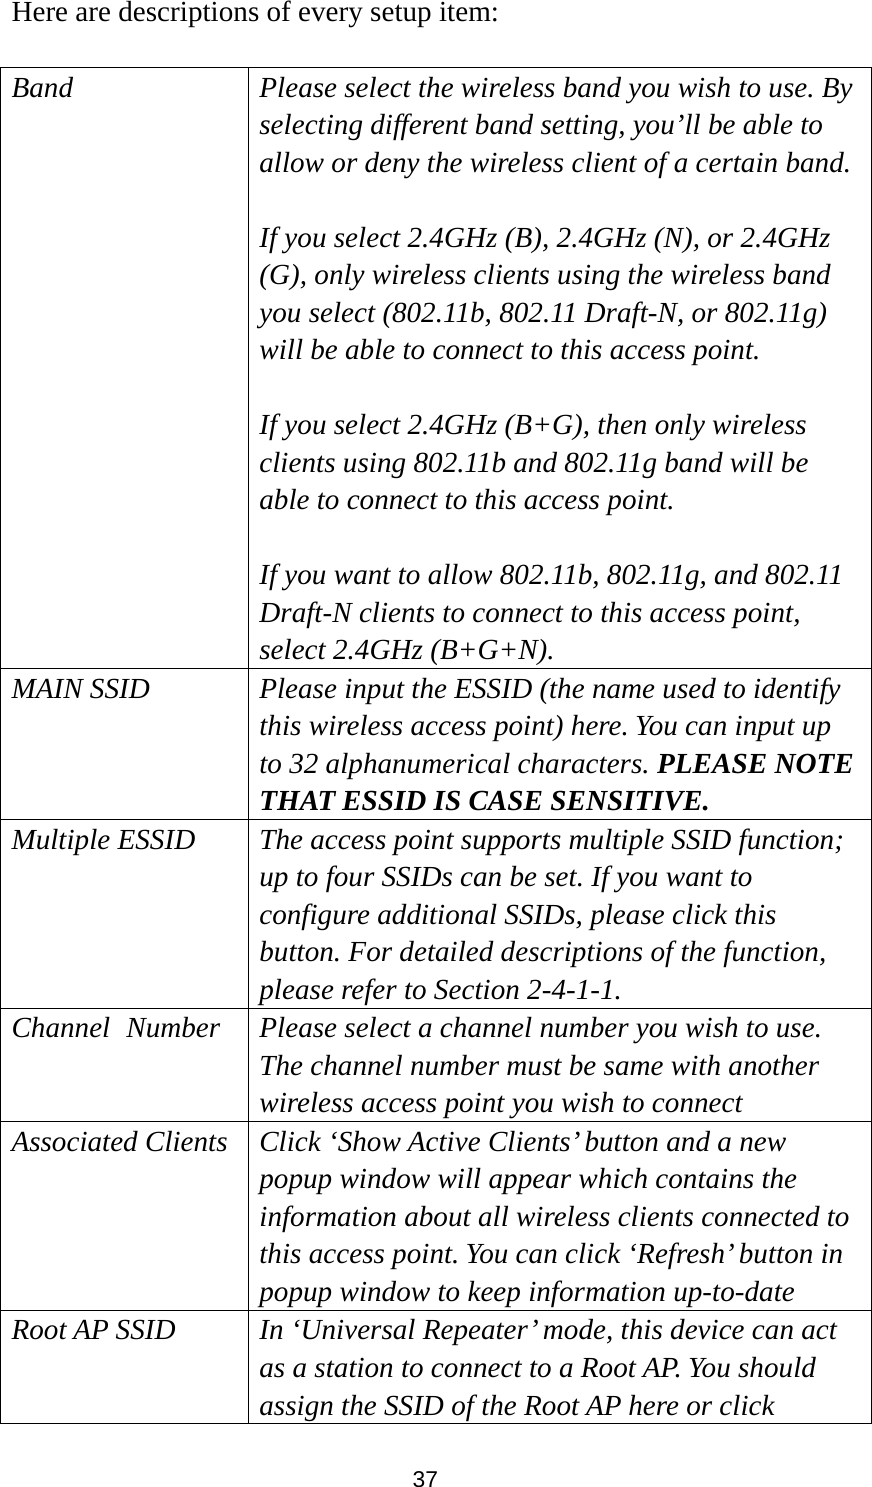  37 Here are descriptions of every setup item:  Band Please select the wireless band you wish to use. By selecting different band setting, you’ll be able to allow or deny the wireless client of a certain band.  If you select 2.4GHz (B), 2.4GHz (N), or 2.4GHz (G), only wireless clients using the wireless band you select (802.11b, 802.11 Draft-N, or 802.11g) will be able to connect to this access point.  If you select 2.4GHz (B+G), then only wireless clients using 802.11b and 802.11g band will be able to connect to this access point.    If you want to allow 802.11b, 802.11g, and 802.11 Draft-N clients to connect to this access point, select 2.4GHz (B+G+N). MAIN SSID  Please input the ESSID (the name used to identify this wireless access point) here. You can input up to 32 alphanumerical characters. PLEASE NOTE   THAT ESSID IS CASE SENSITIVE. Multiple ESSID  The access point supports multiple SSID function; up to four SSIDs can be set. If you want to configure additional SSIDs, please click this button. For detailed descriptions of the function, please refer to Section 2-4-1-1. Channel   Number Please select a channel number you wish to use. The channel number must be same with another wireless access point you wish to connect Associated Clients  Click ‘Show Active Clients’ button and a new popup window will appear which contains the information about all wireless clients connected to this access point. You can click ‘Refresh’ button in popup window to keep information up-to-date Root AP SSID In ‘Universal Repeater’ mode, this device can act as a station to connect to a Root AP. You should assign the SSID of the Root AP here or click 